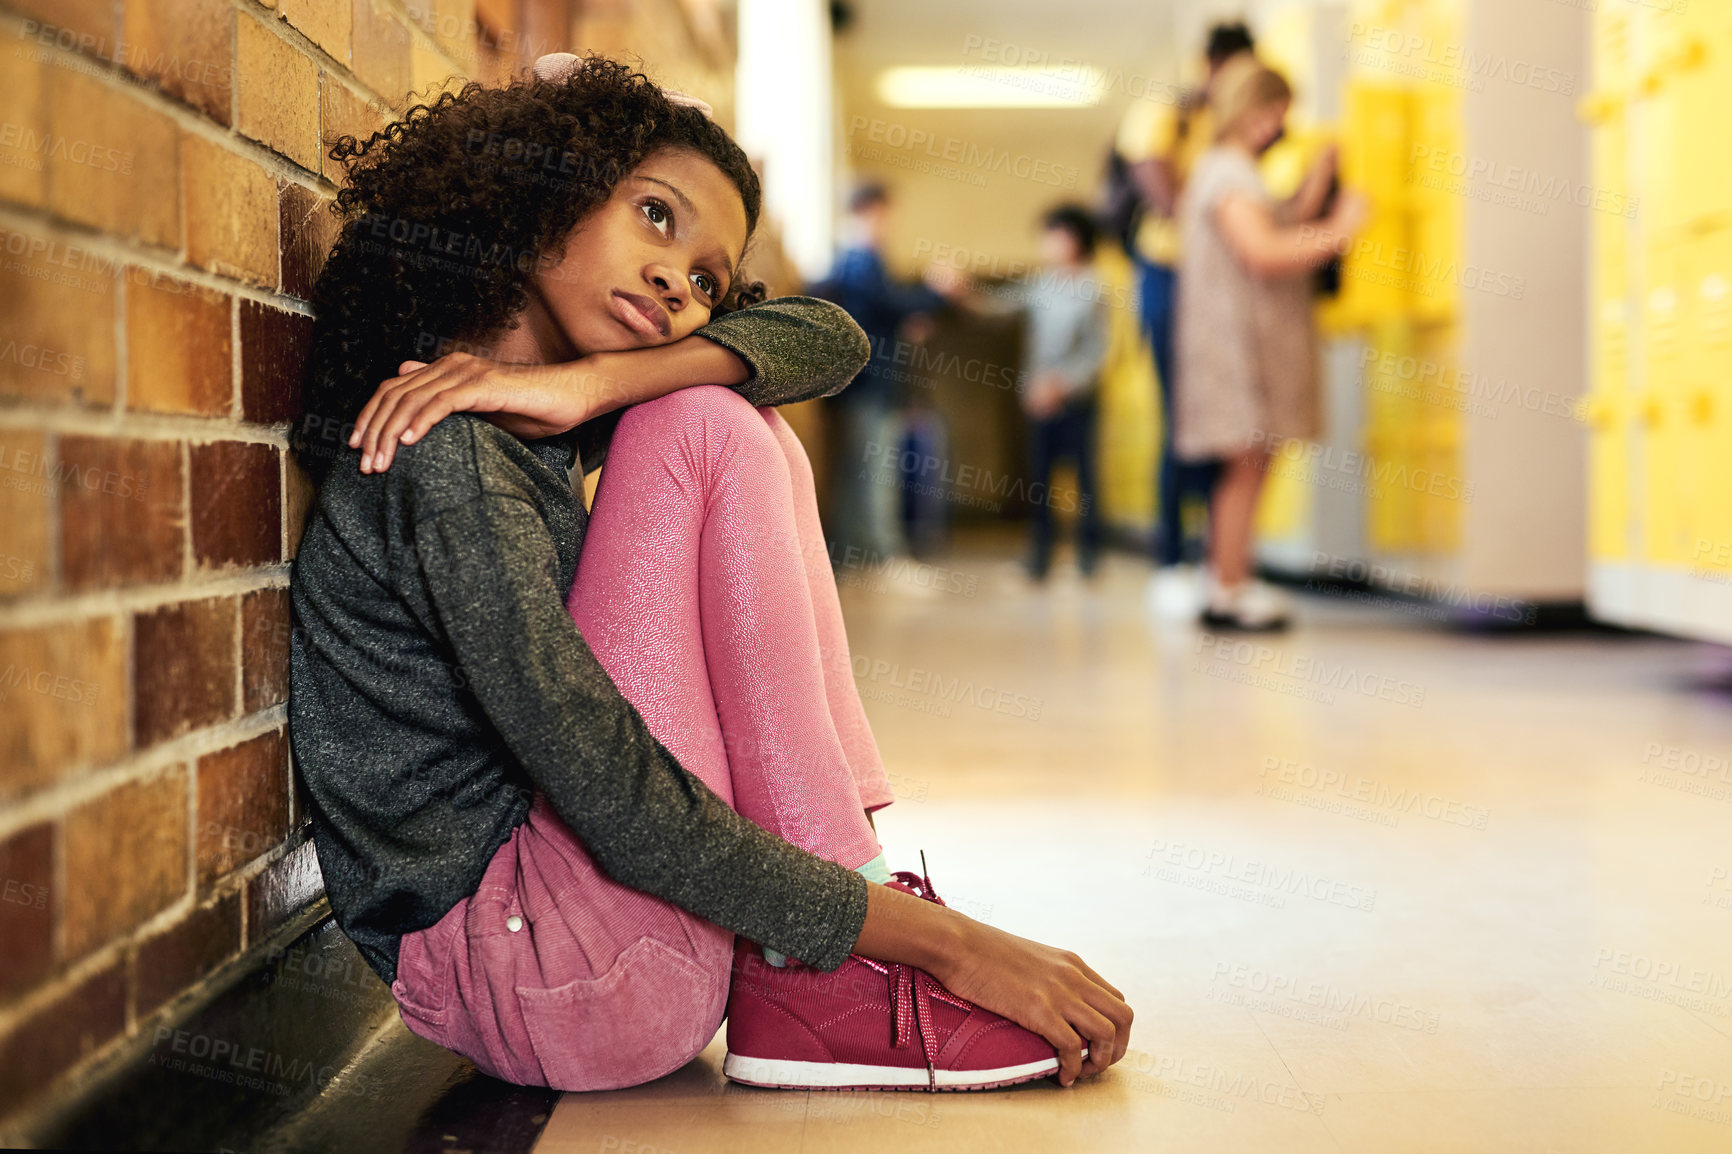 Buy stock photo Full length shot of a young girl sitting in the hallway at school and feeling depressed